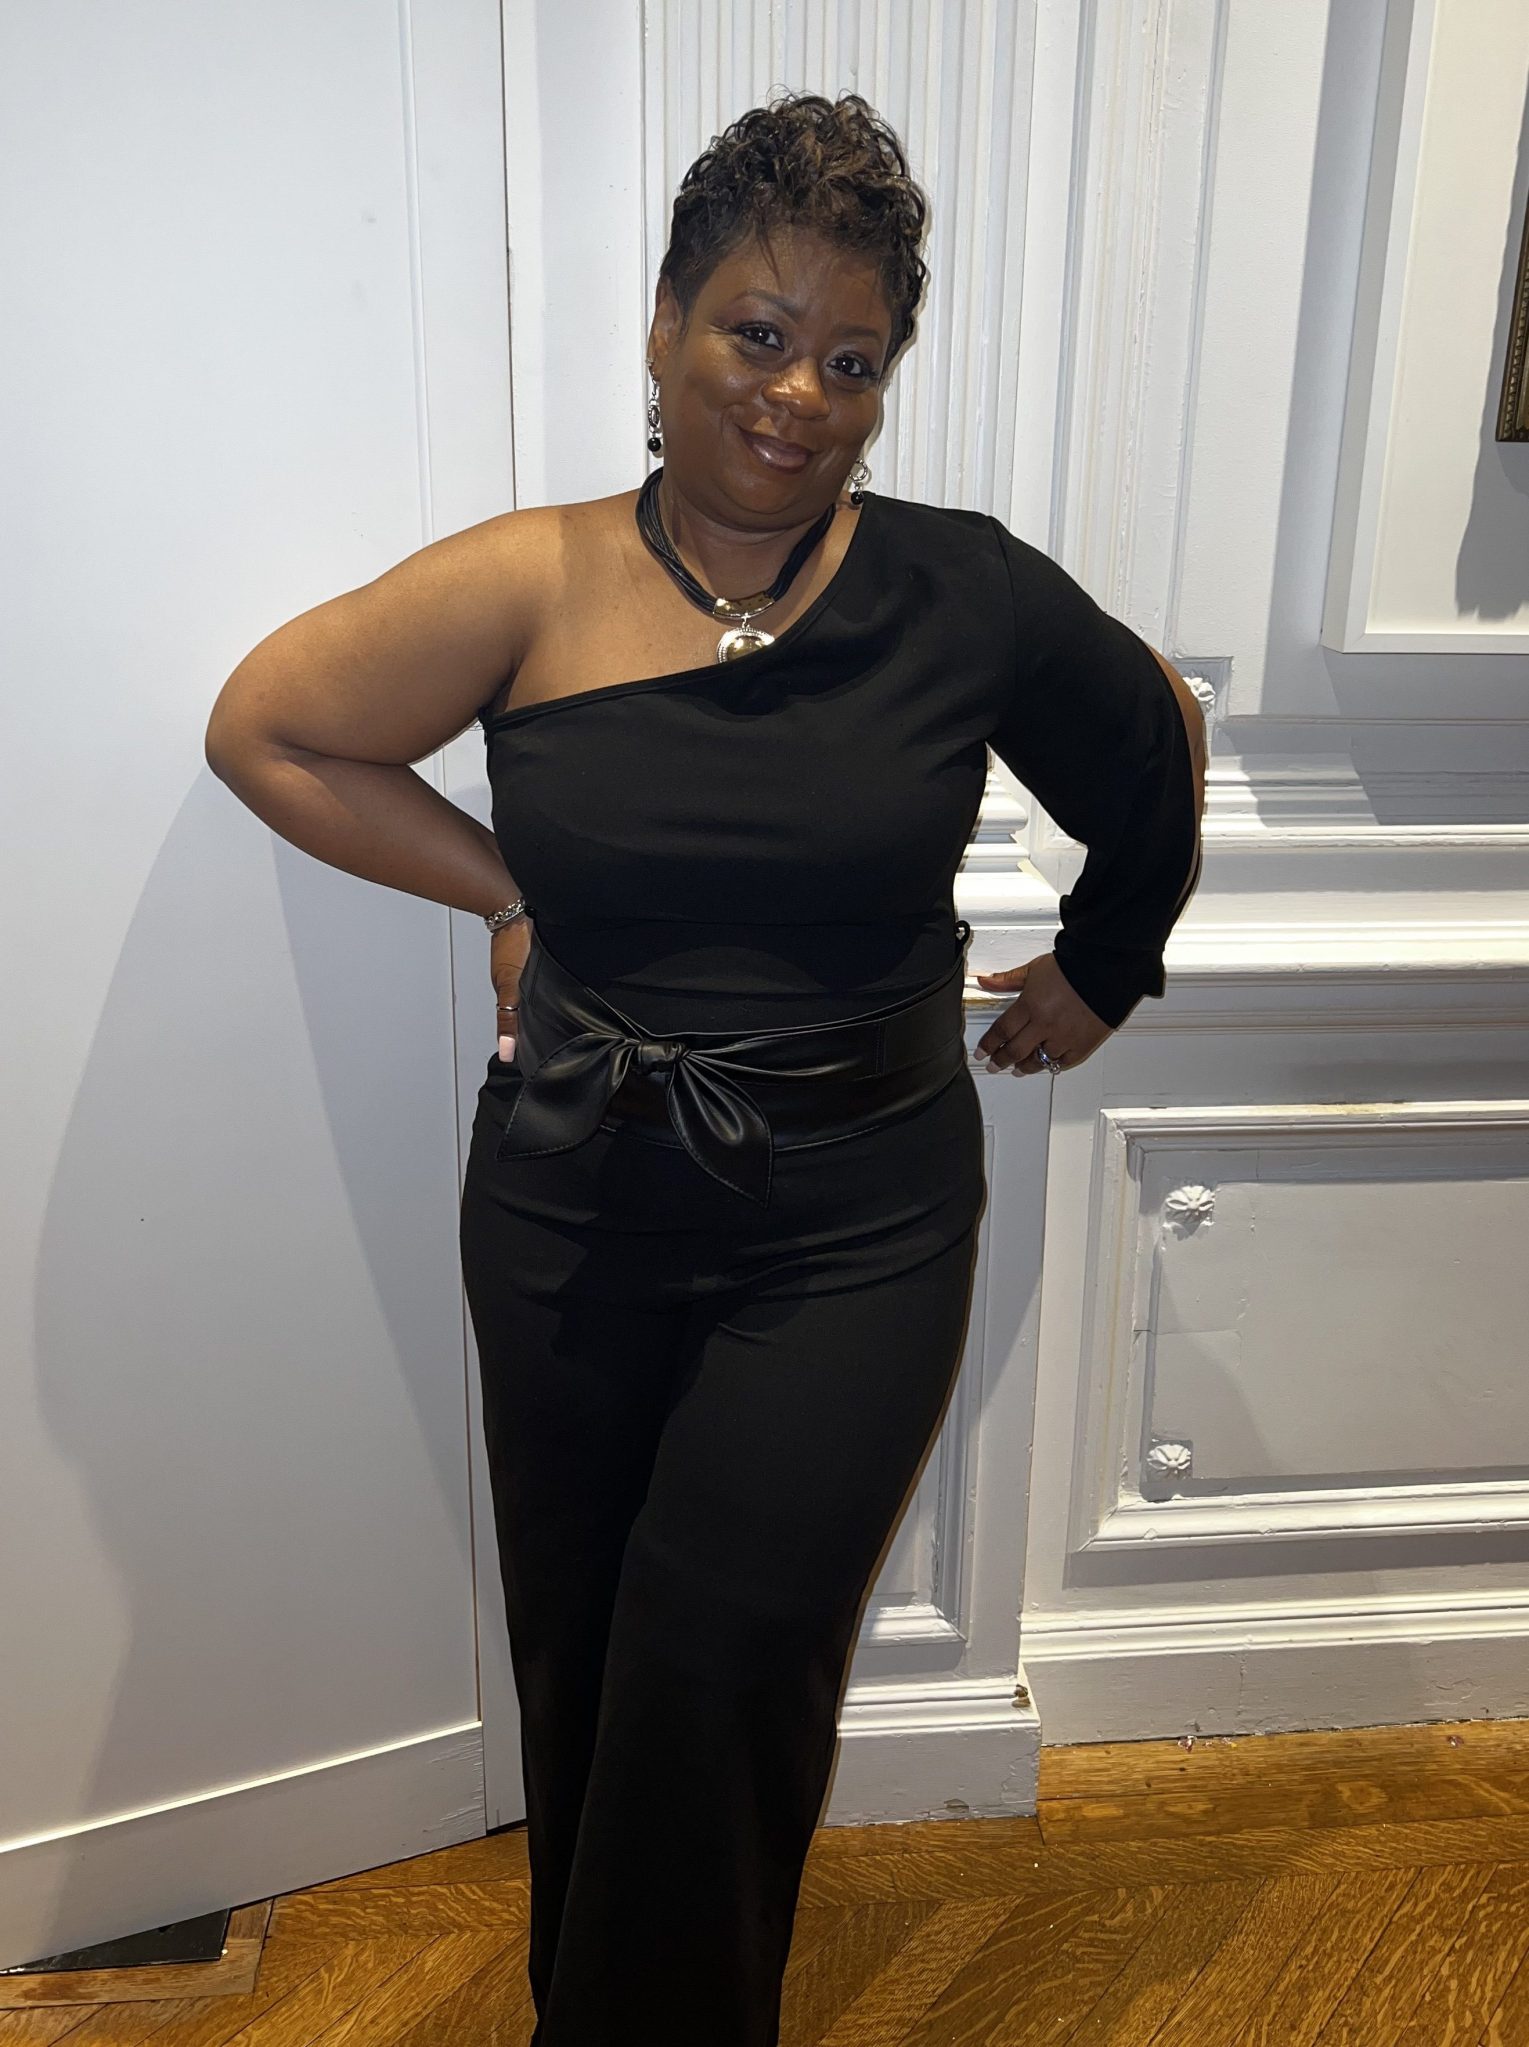 Renee King stands against a white wall wearing a dressy black shirt and black pants. 